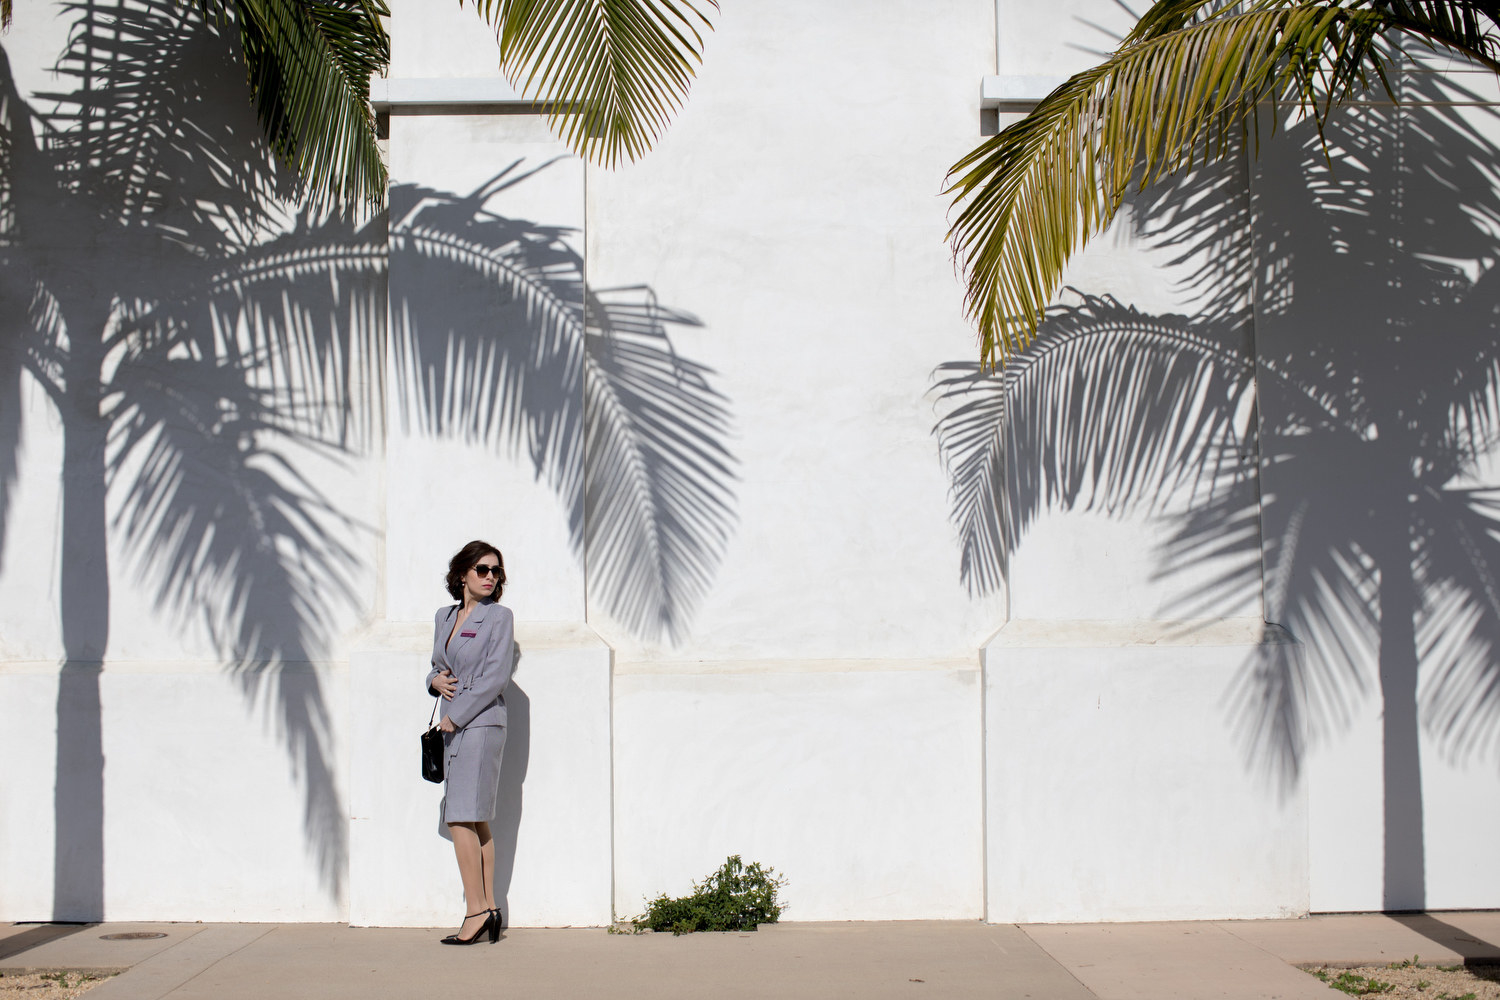 A woman in a skirt and blazer outside under palm trees